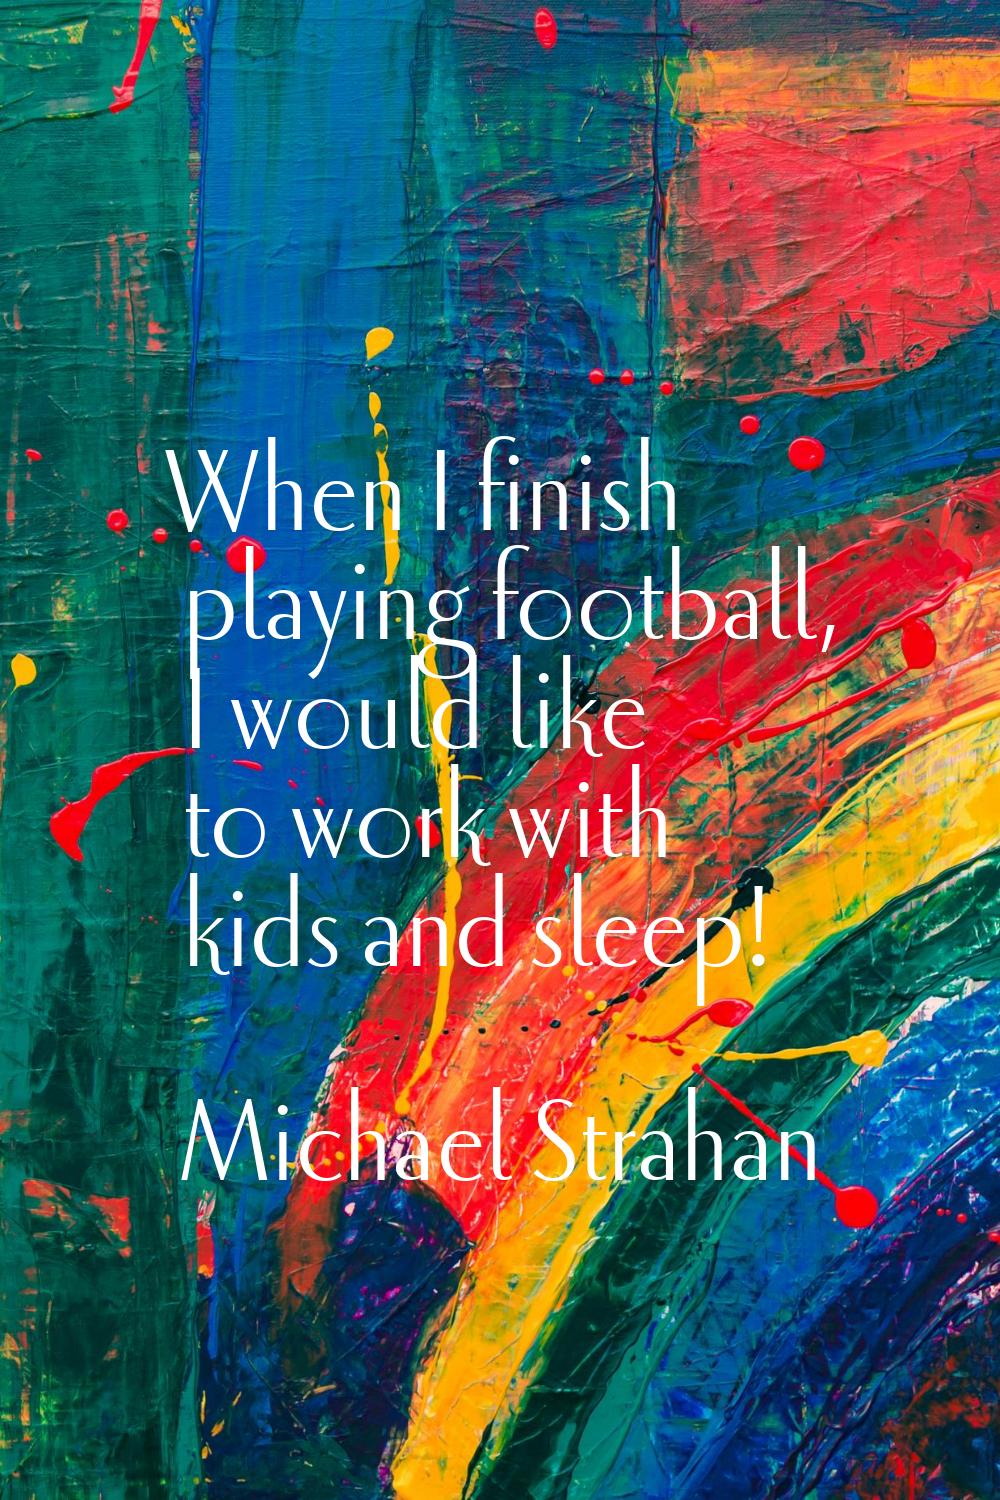 When I finish playing football, I would like to work with kids and sleep!